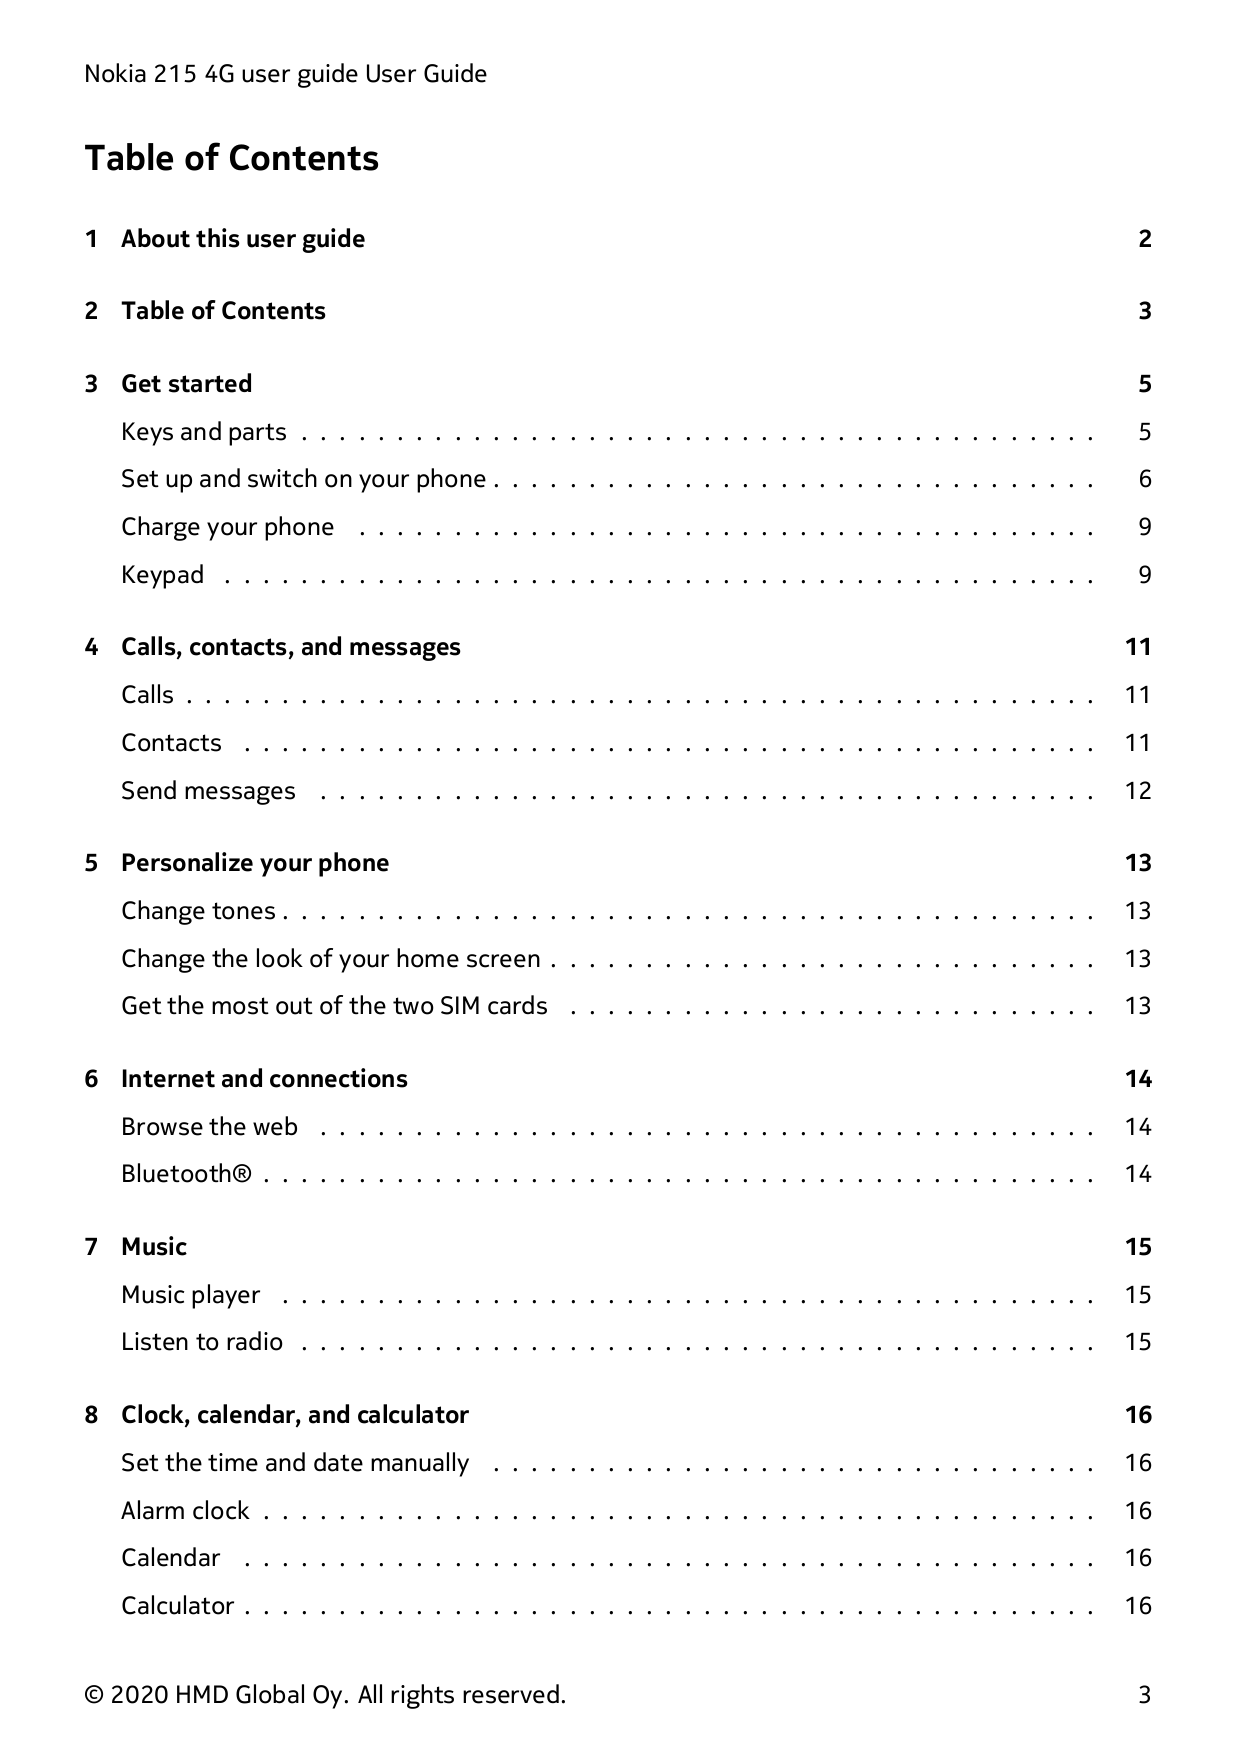 Nokia 215 4G user guide User GuideTable of Contents1 About this user guide22 Table of Contents33 Get started5Keys and parts . . 